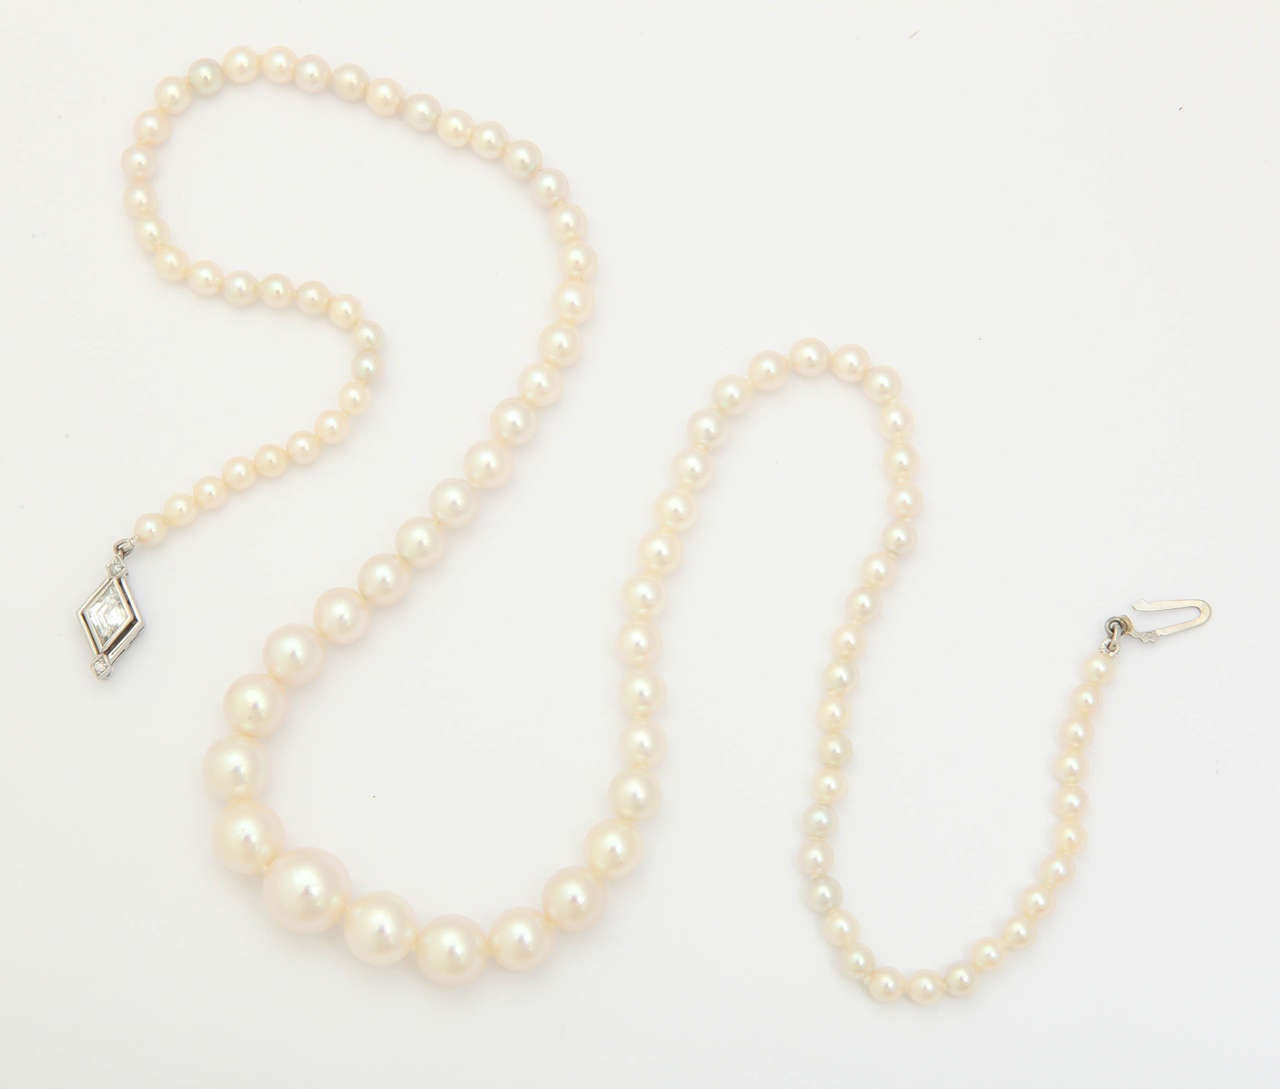 Graduated Cultured Pearl Necklace with Diamond Gold Clasp For Sale 2